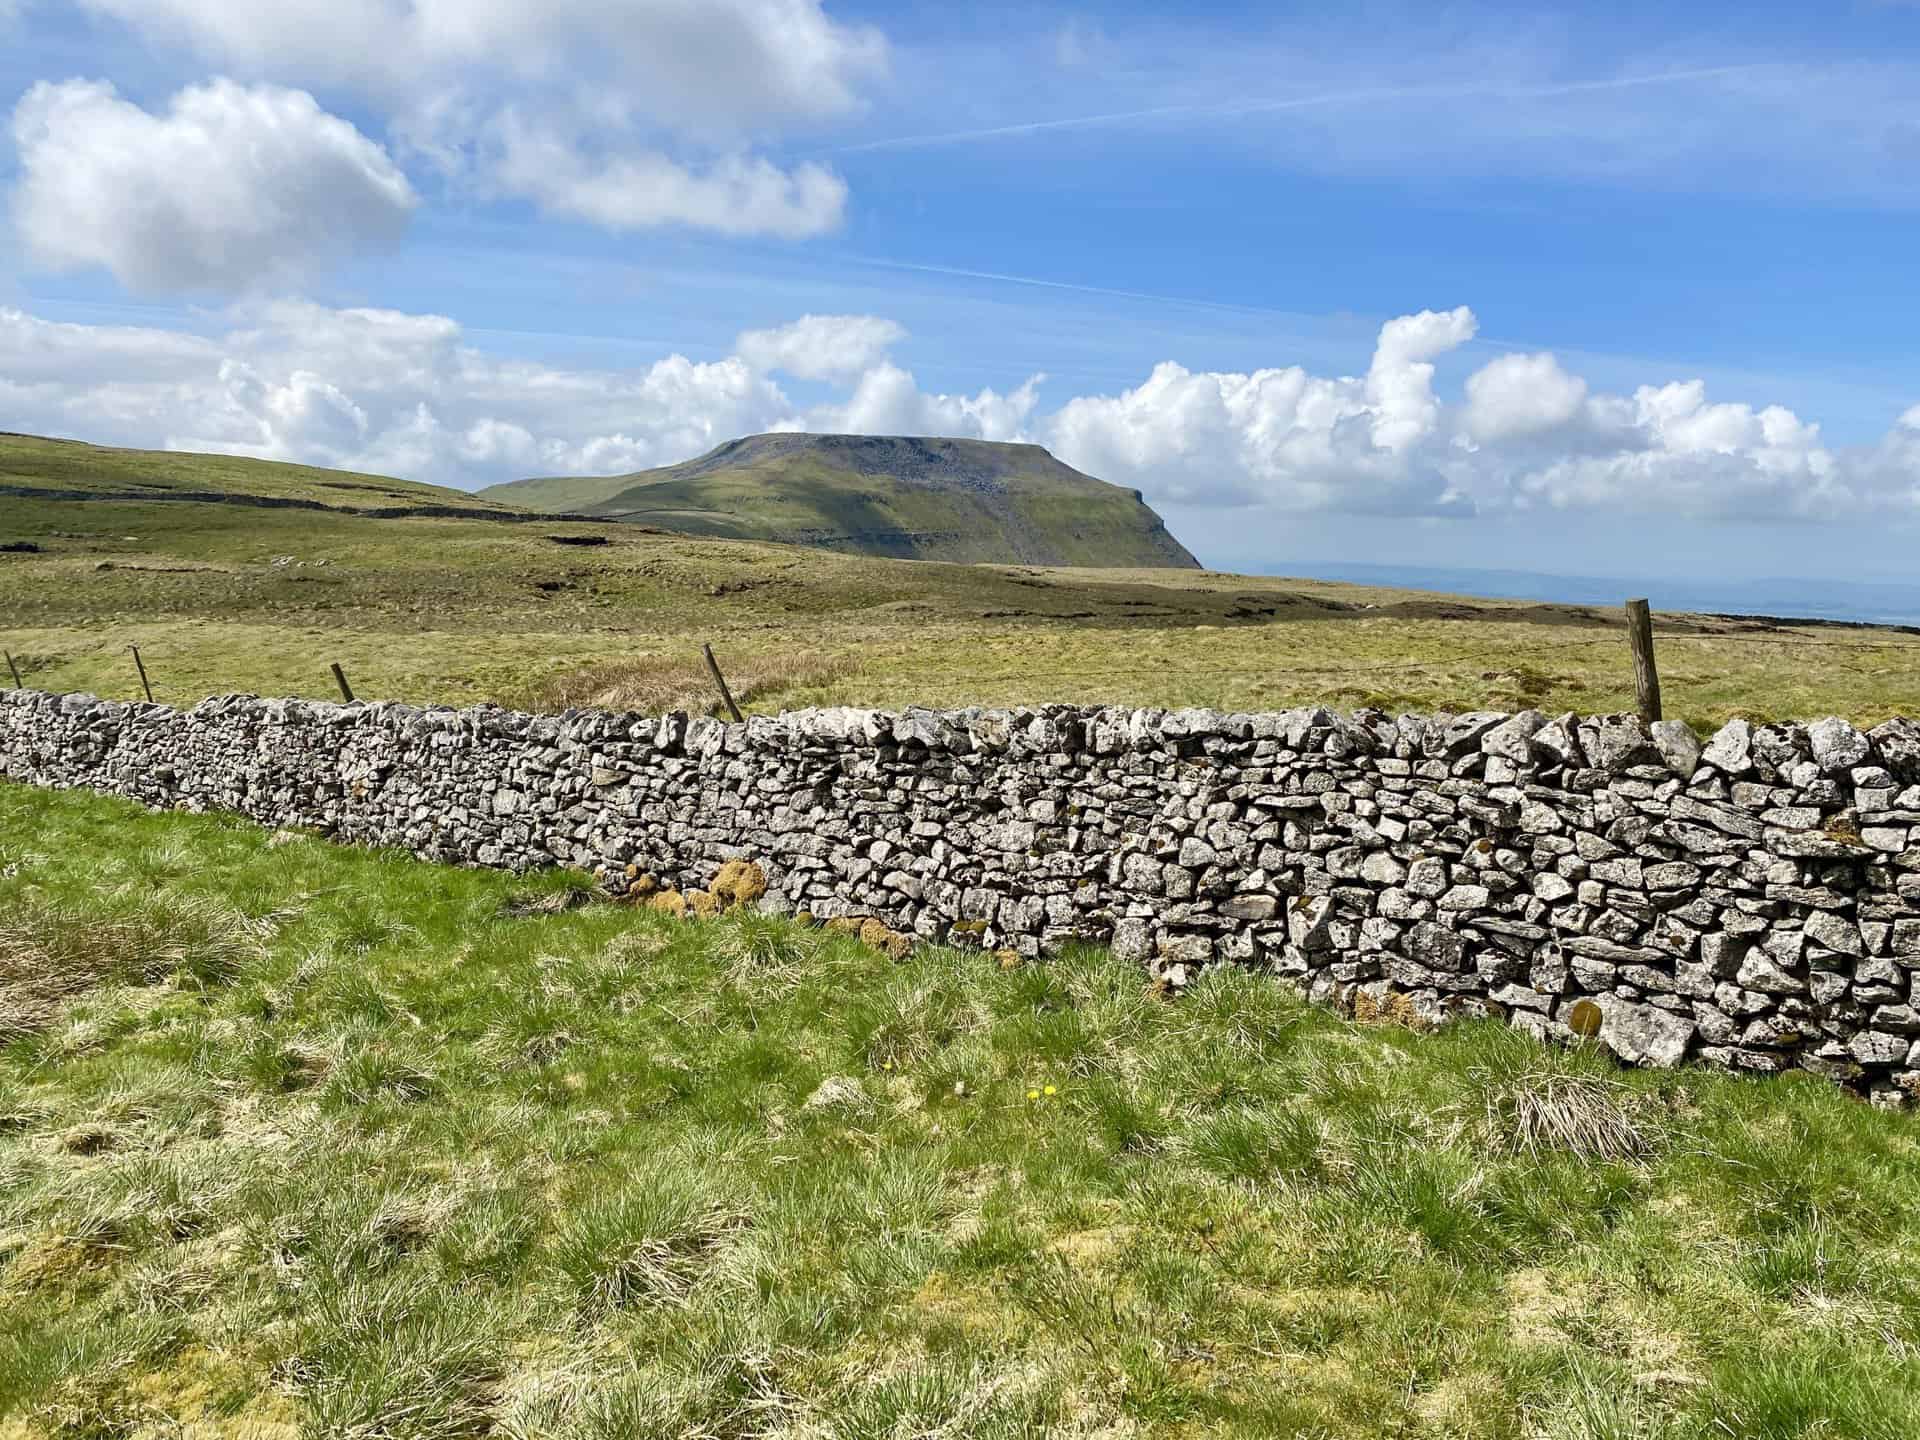 The view of Ingleborough from the northern flanks of Simon Fell.